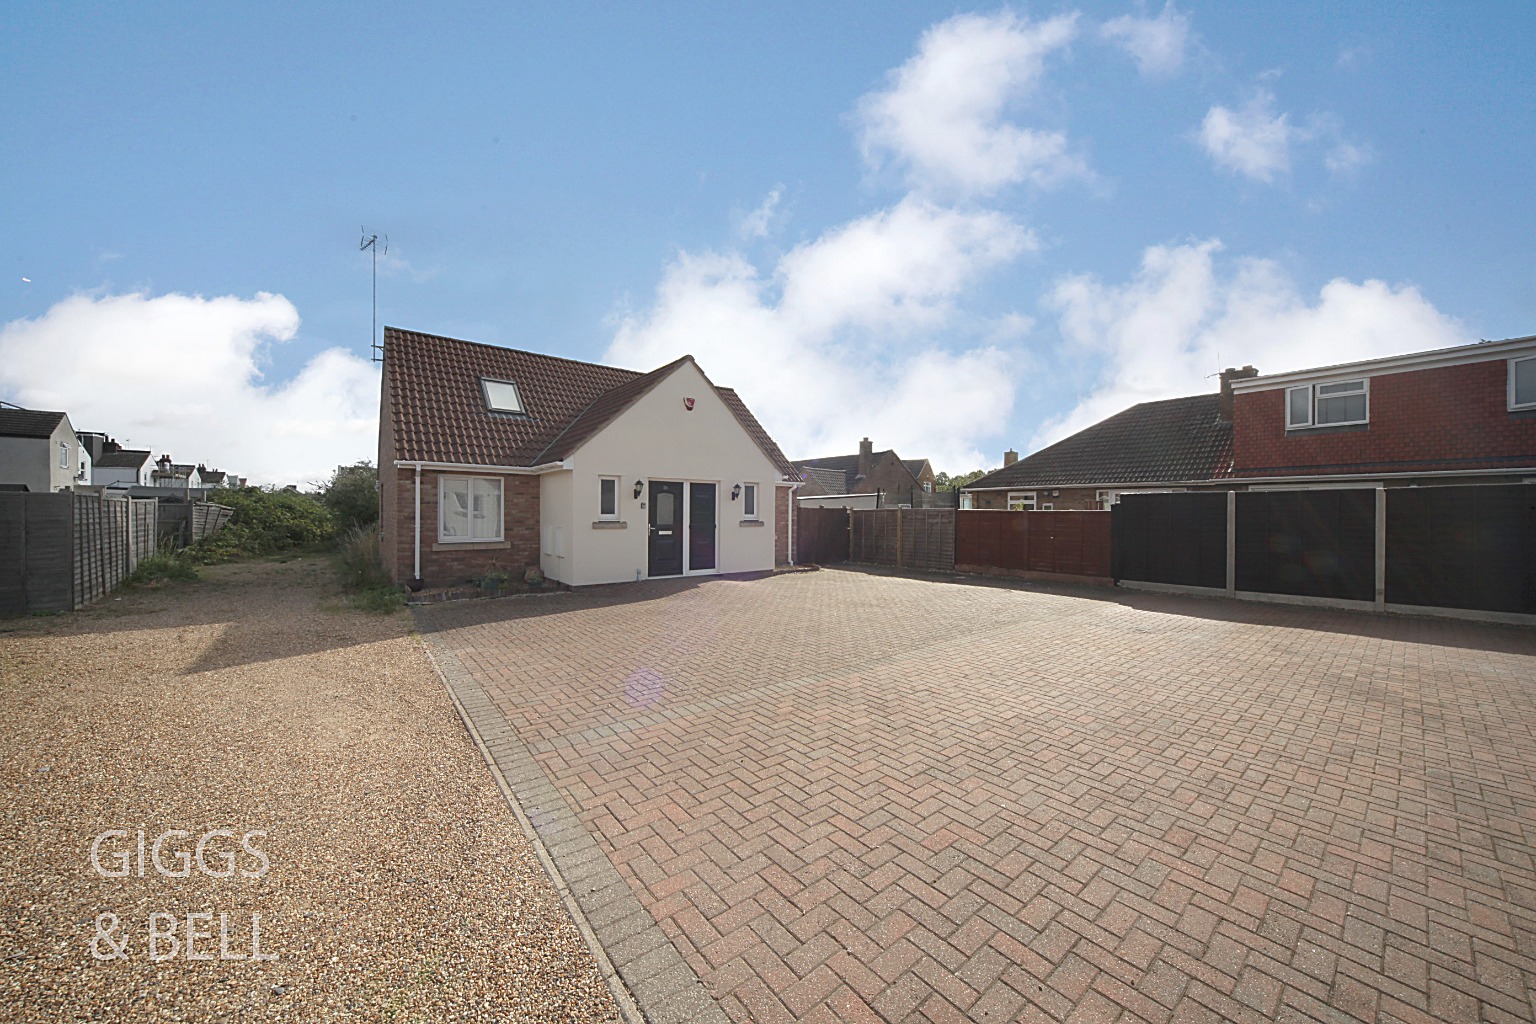 3 bed detached bungalow for sale in Gardenia Avenue, Luton - Property Image 1